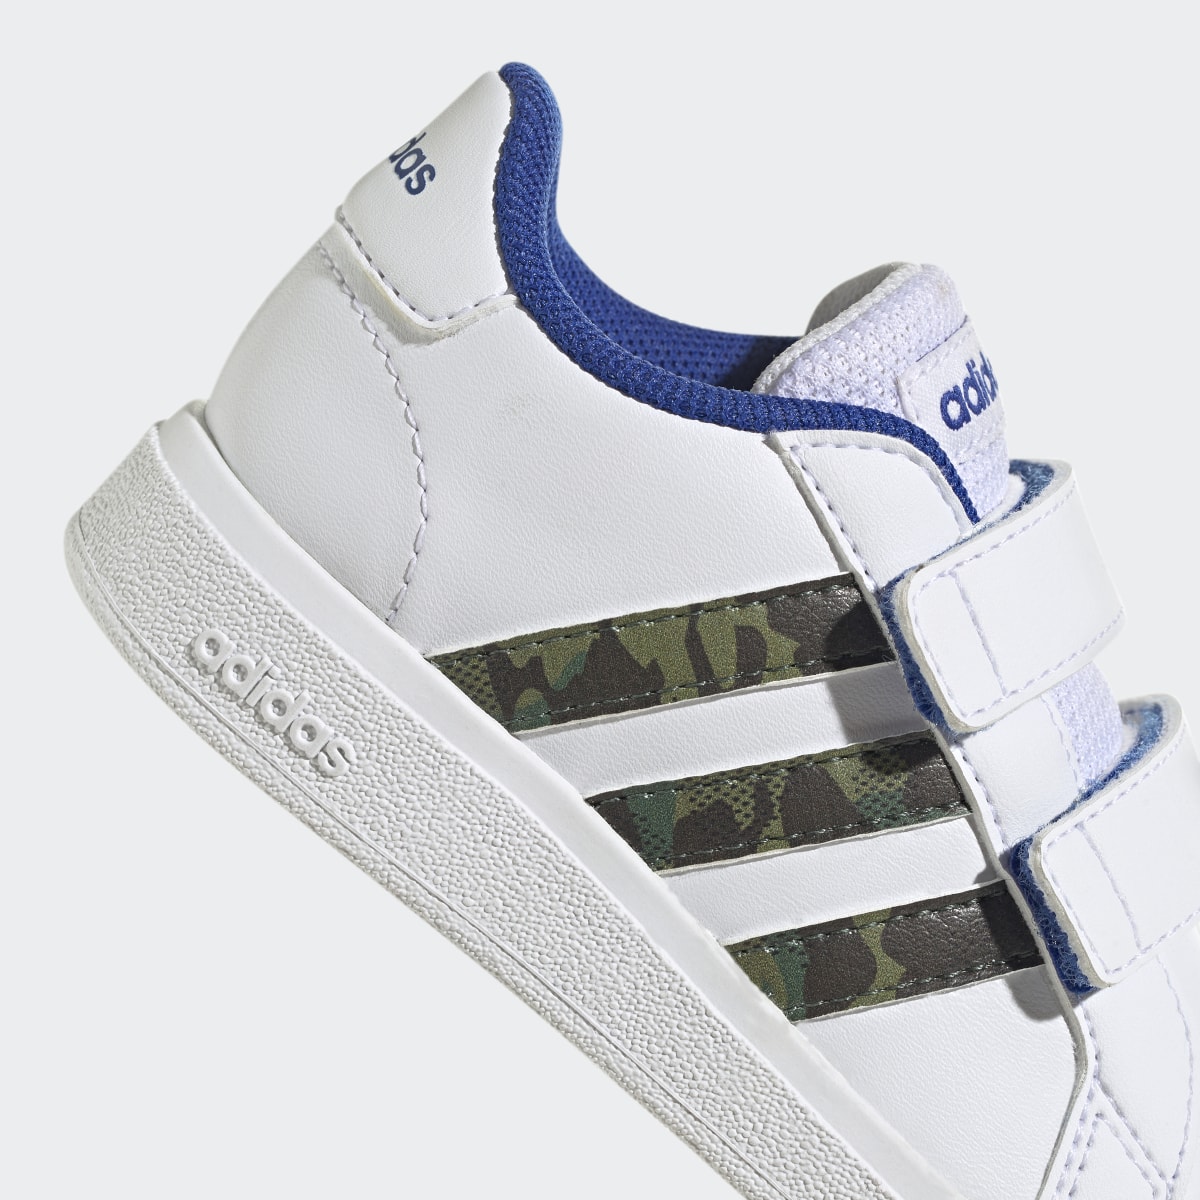 Adidas Grand Court 2.0 Shoes. 9